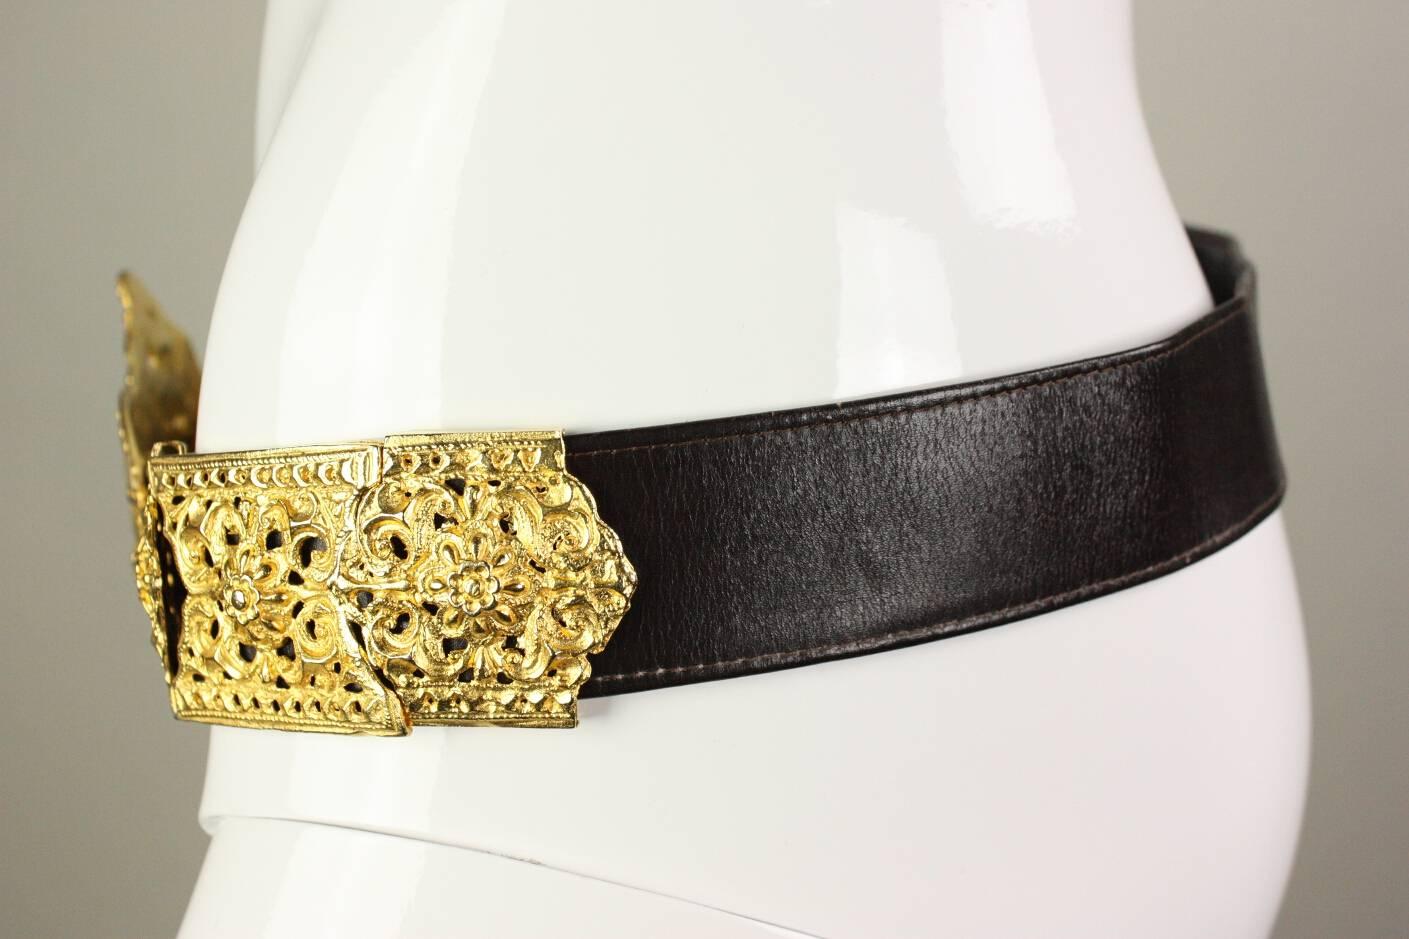 Vintage belt from Roberta di Camerino dates to the 1970's and is made of dark brown leather with bold gold hardware.  Hook closure.  Labeled size 32 and is not adjustable.

Measurements-
Width: 1 1/2